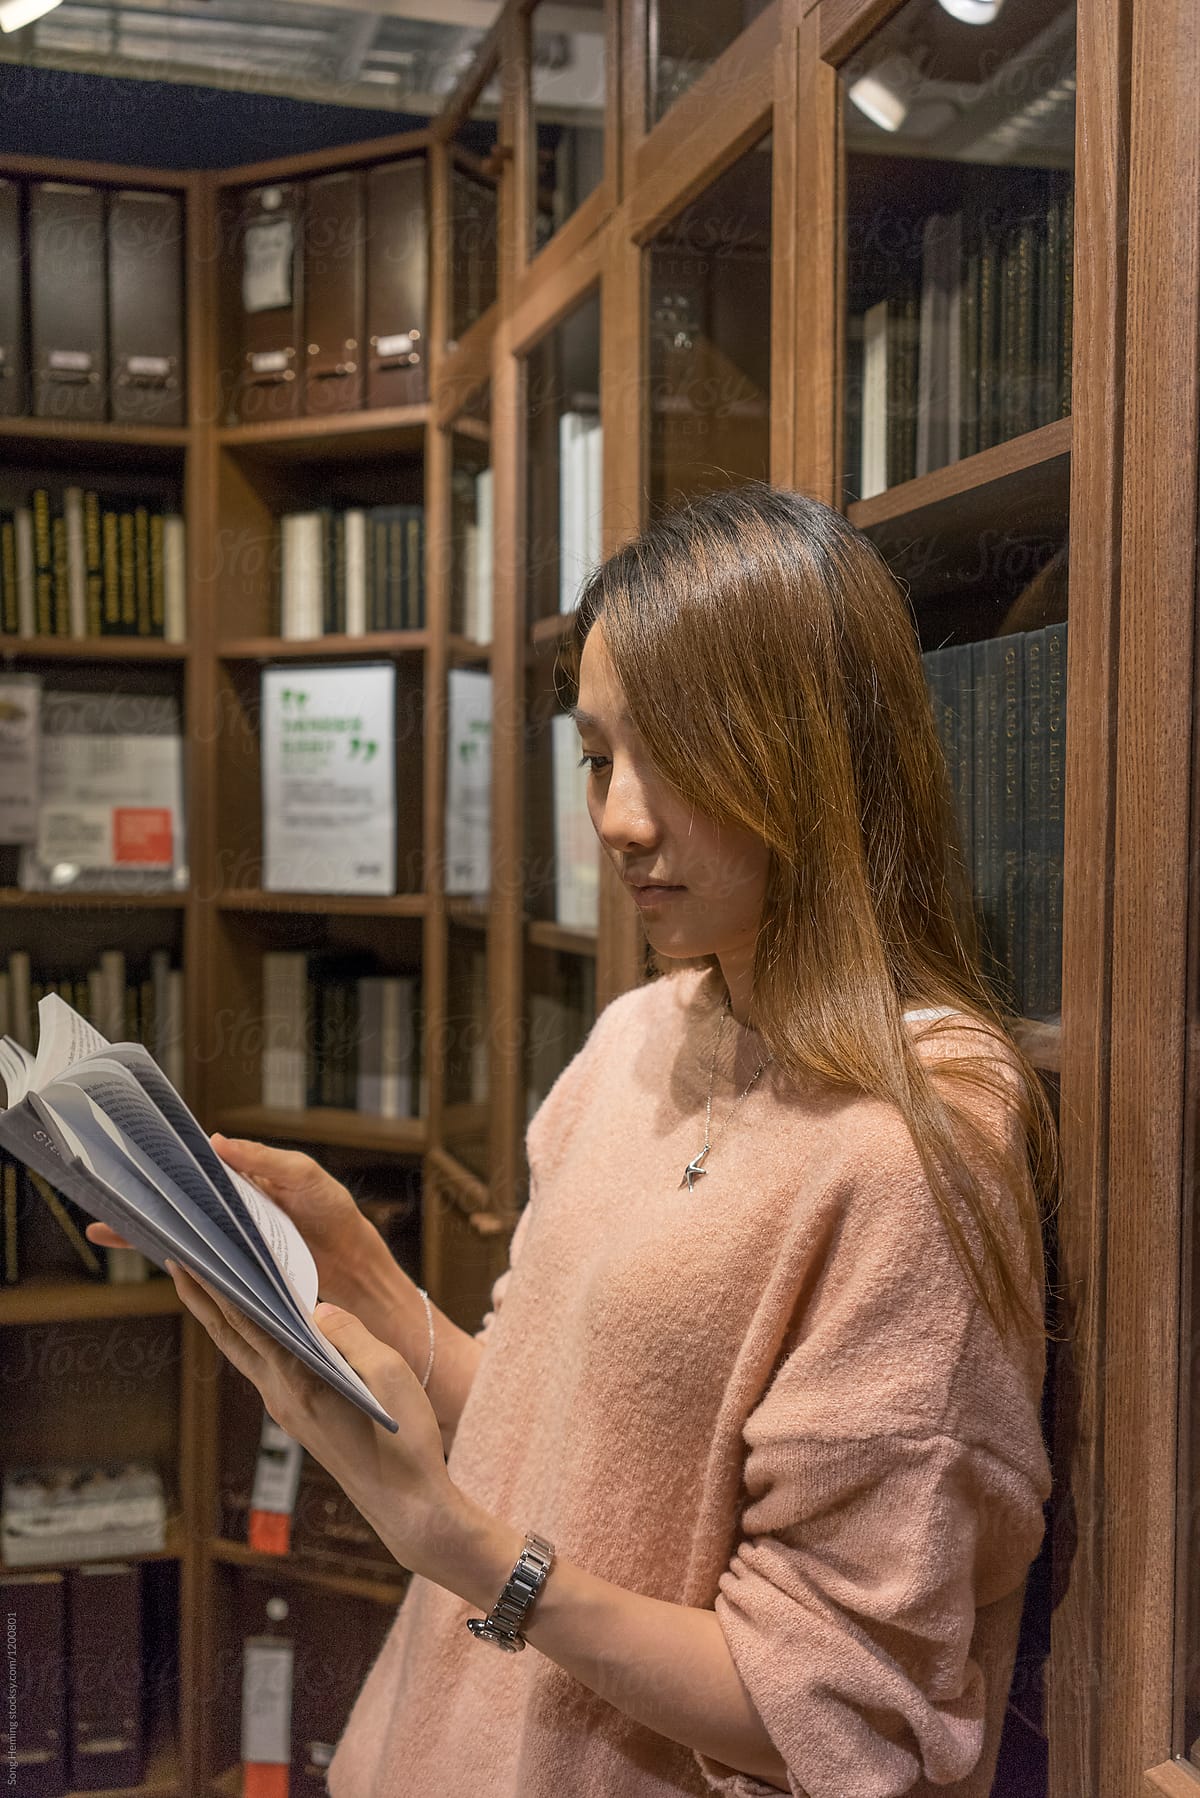 Beautiful Chinese young woman reading book against bookshelf